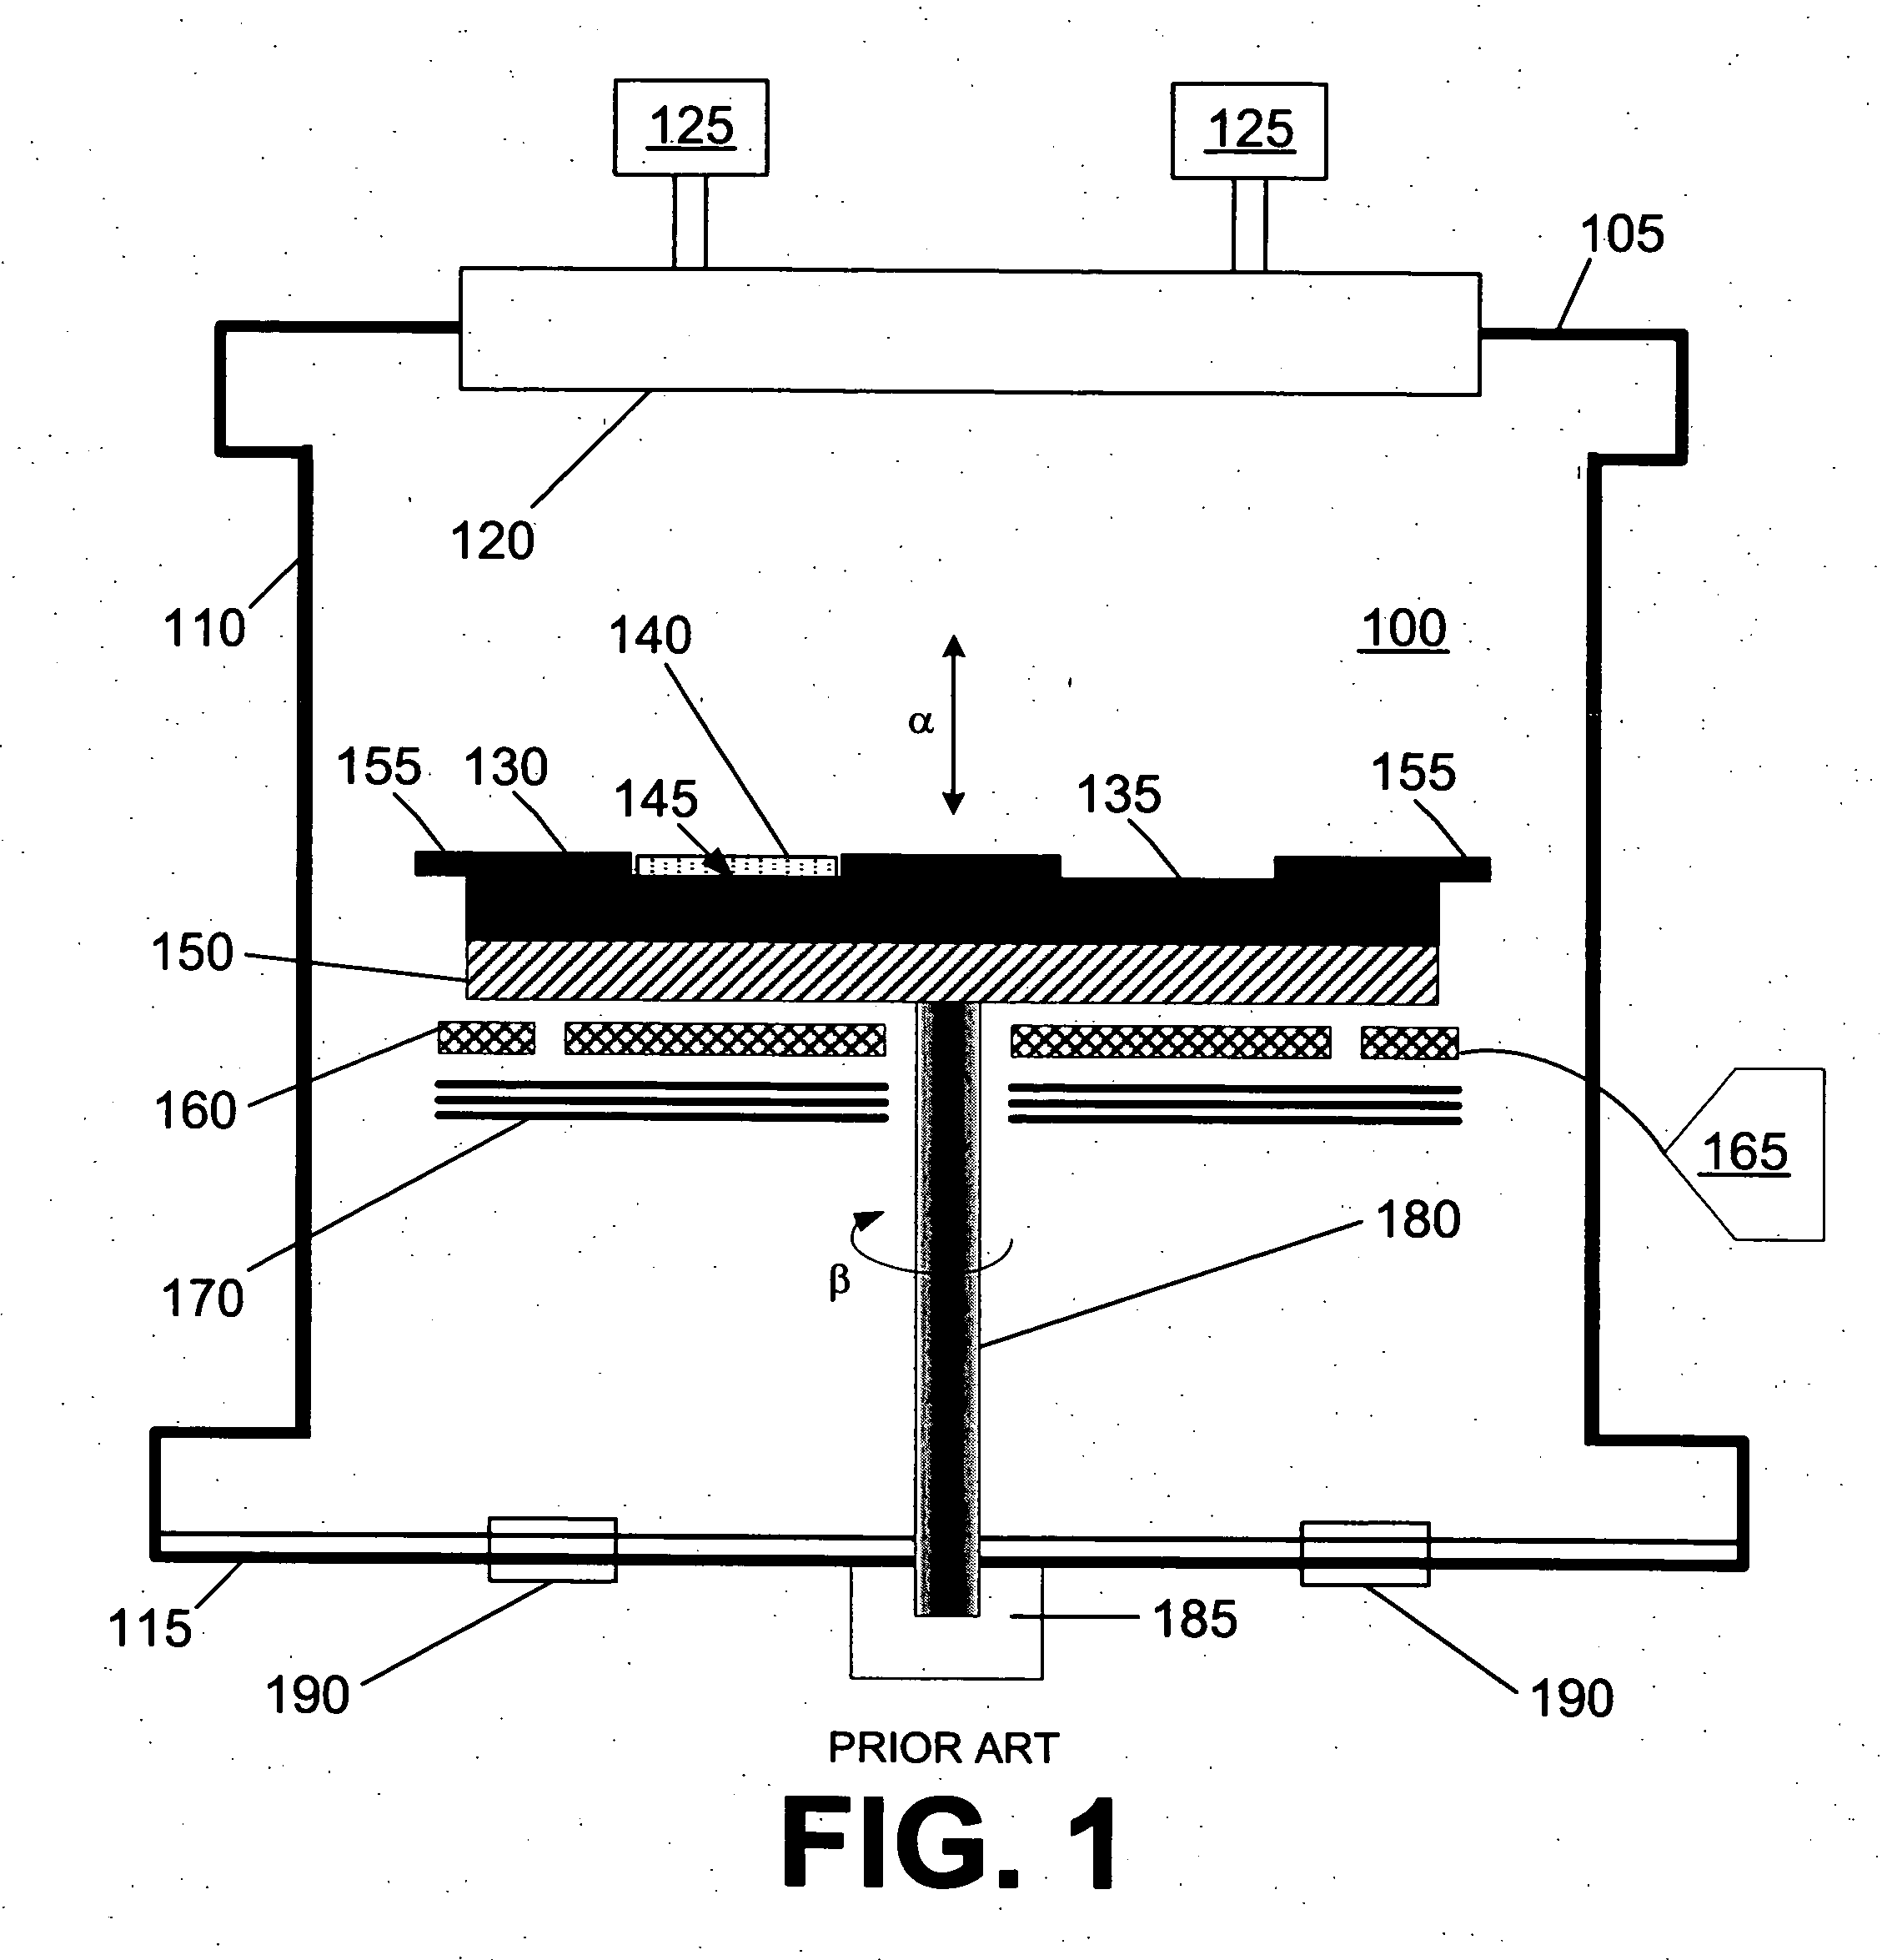 System and method for varying wafer surface temperature via wafer-carrier temperature offset